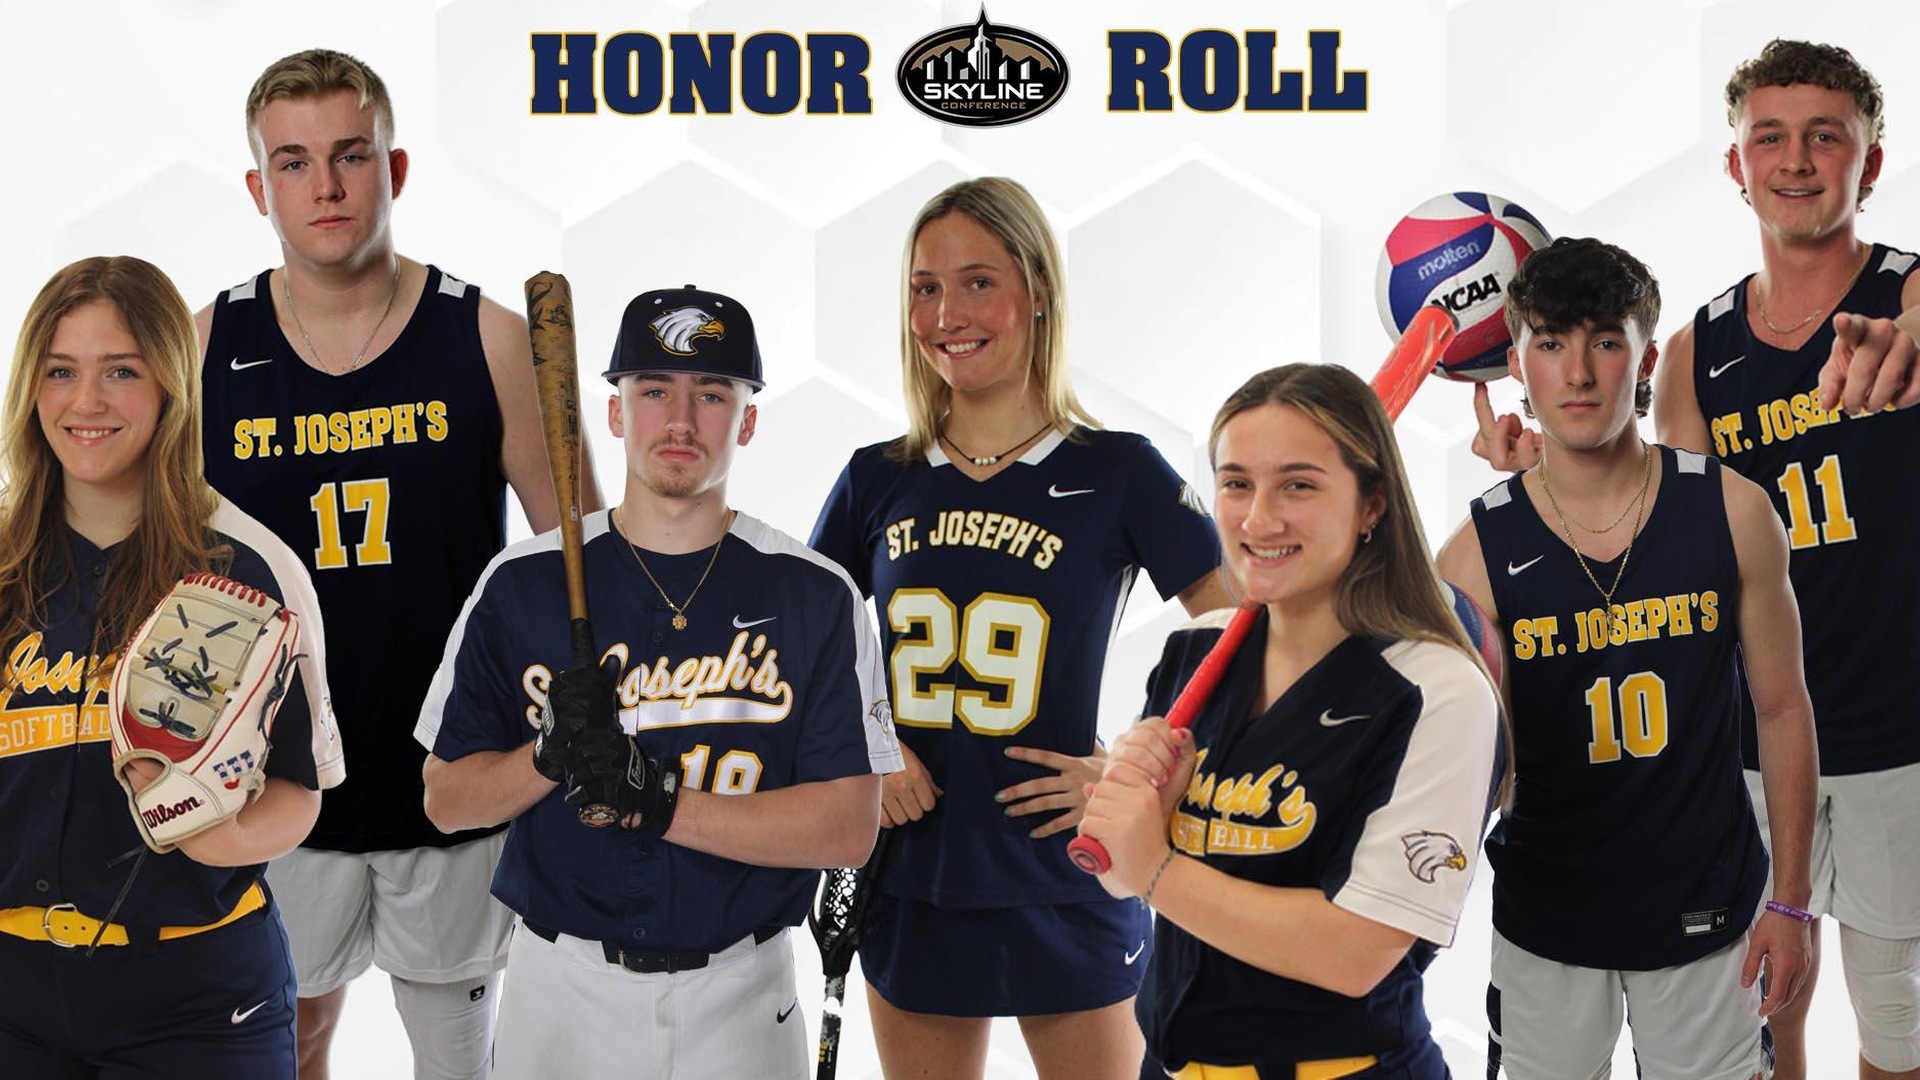 Seven Golden Eagles Dubbed Skyline Weekly Honor Roll